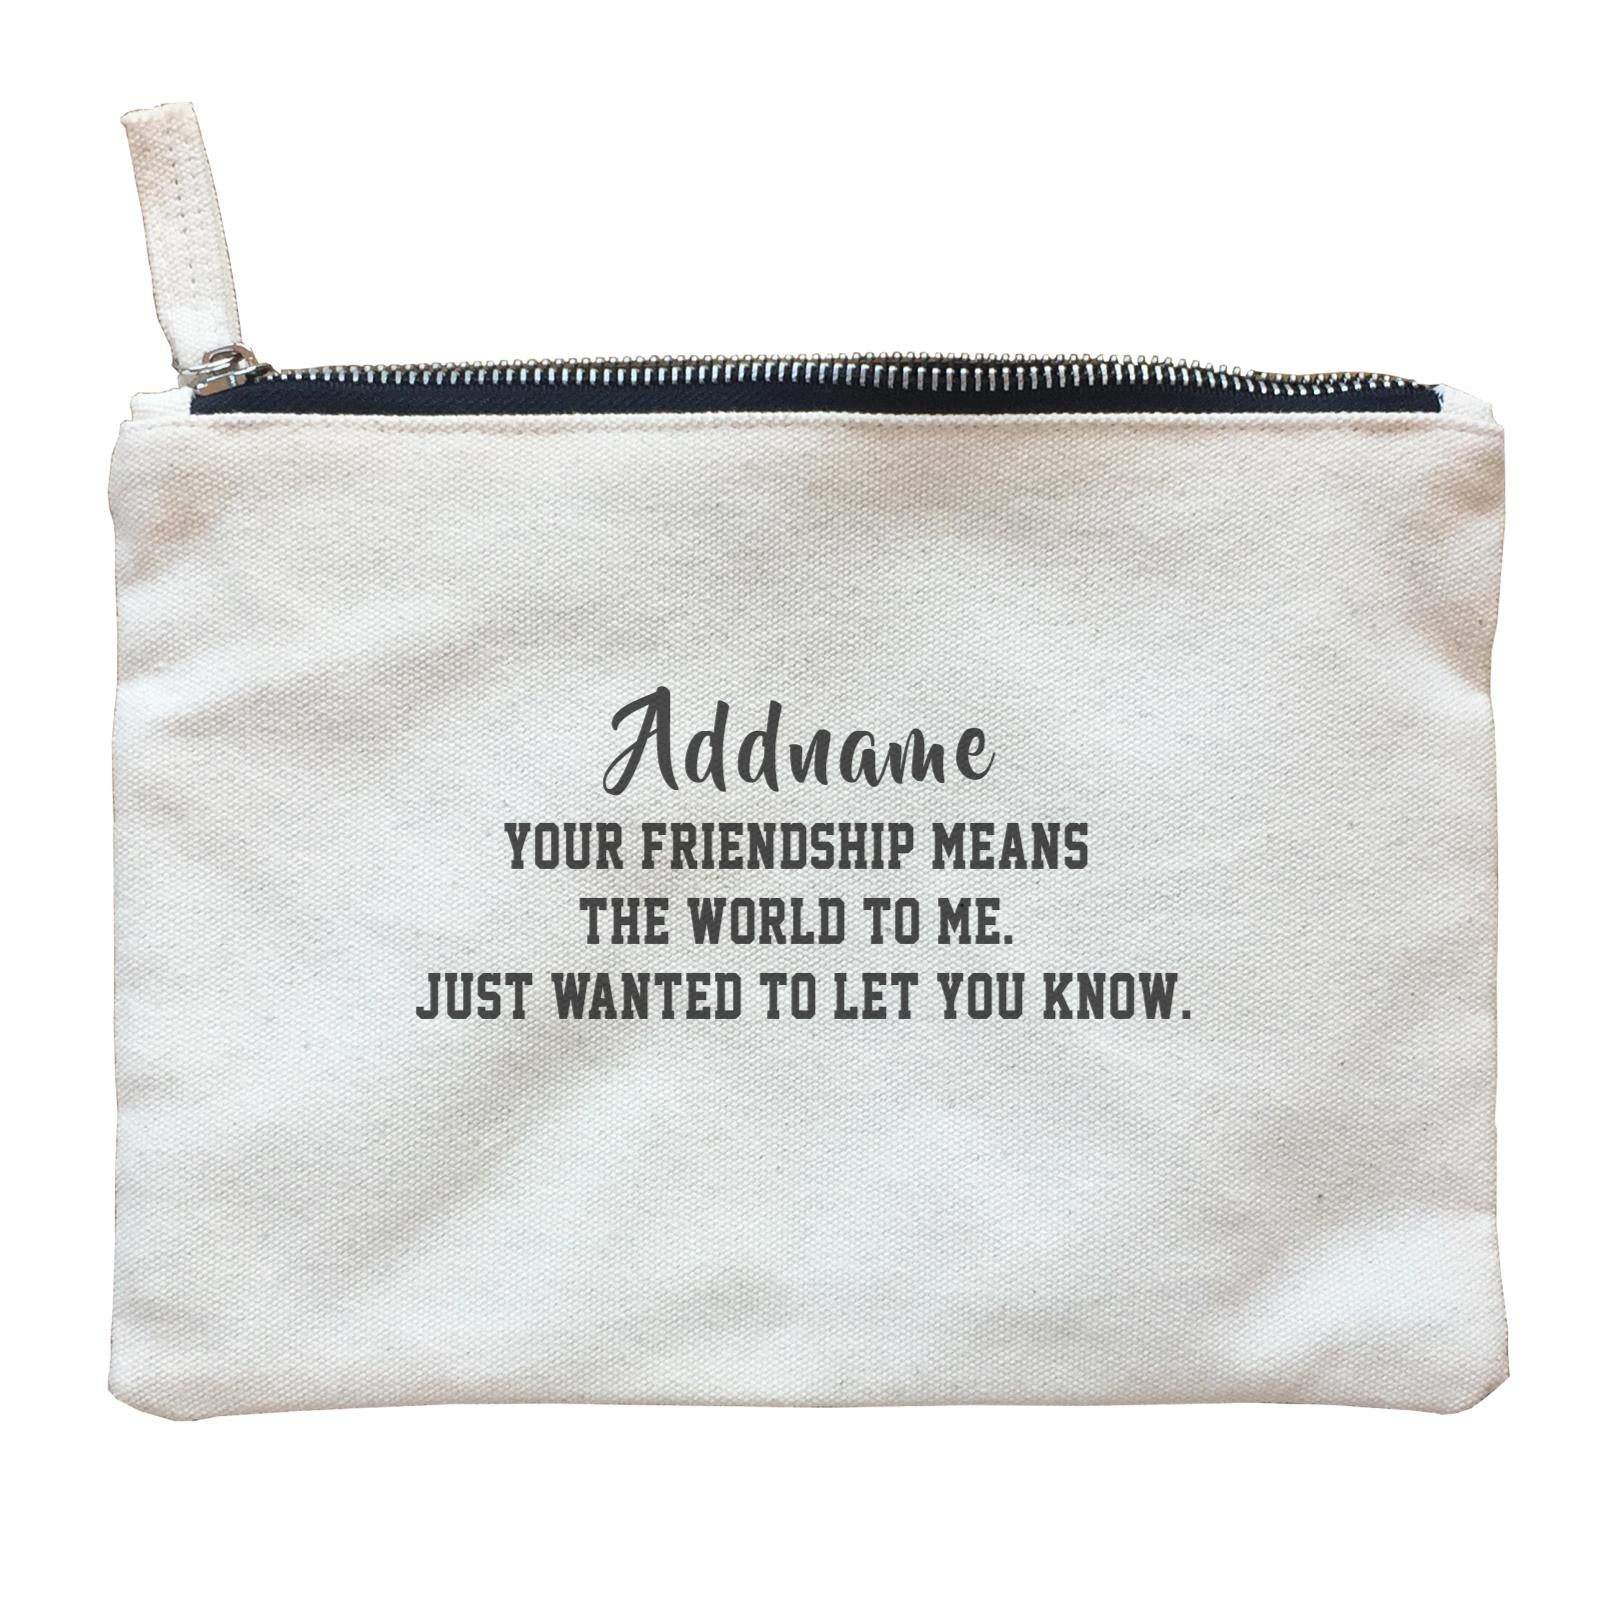 Best Friends Quotes Addname Your Friendship Means The World To Me Zipper Pouch